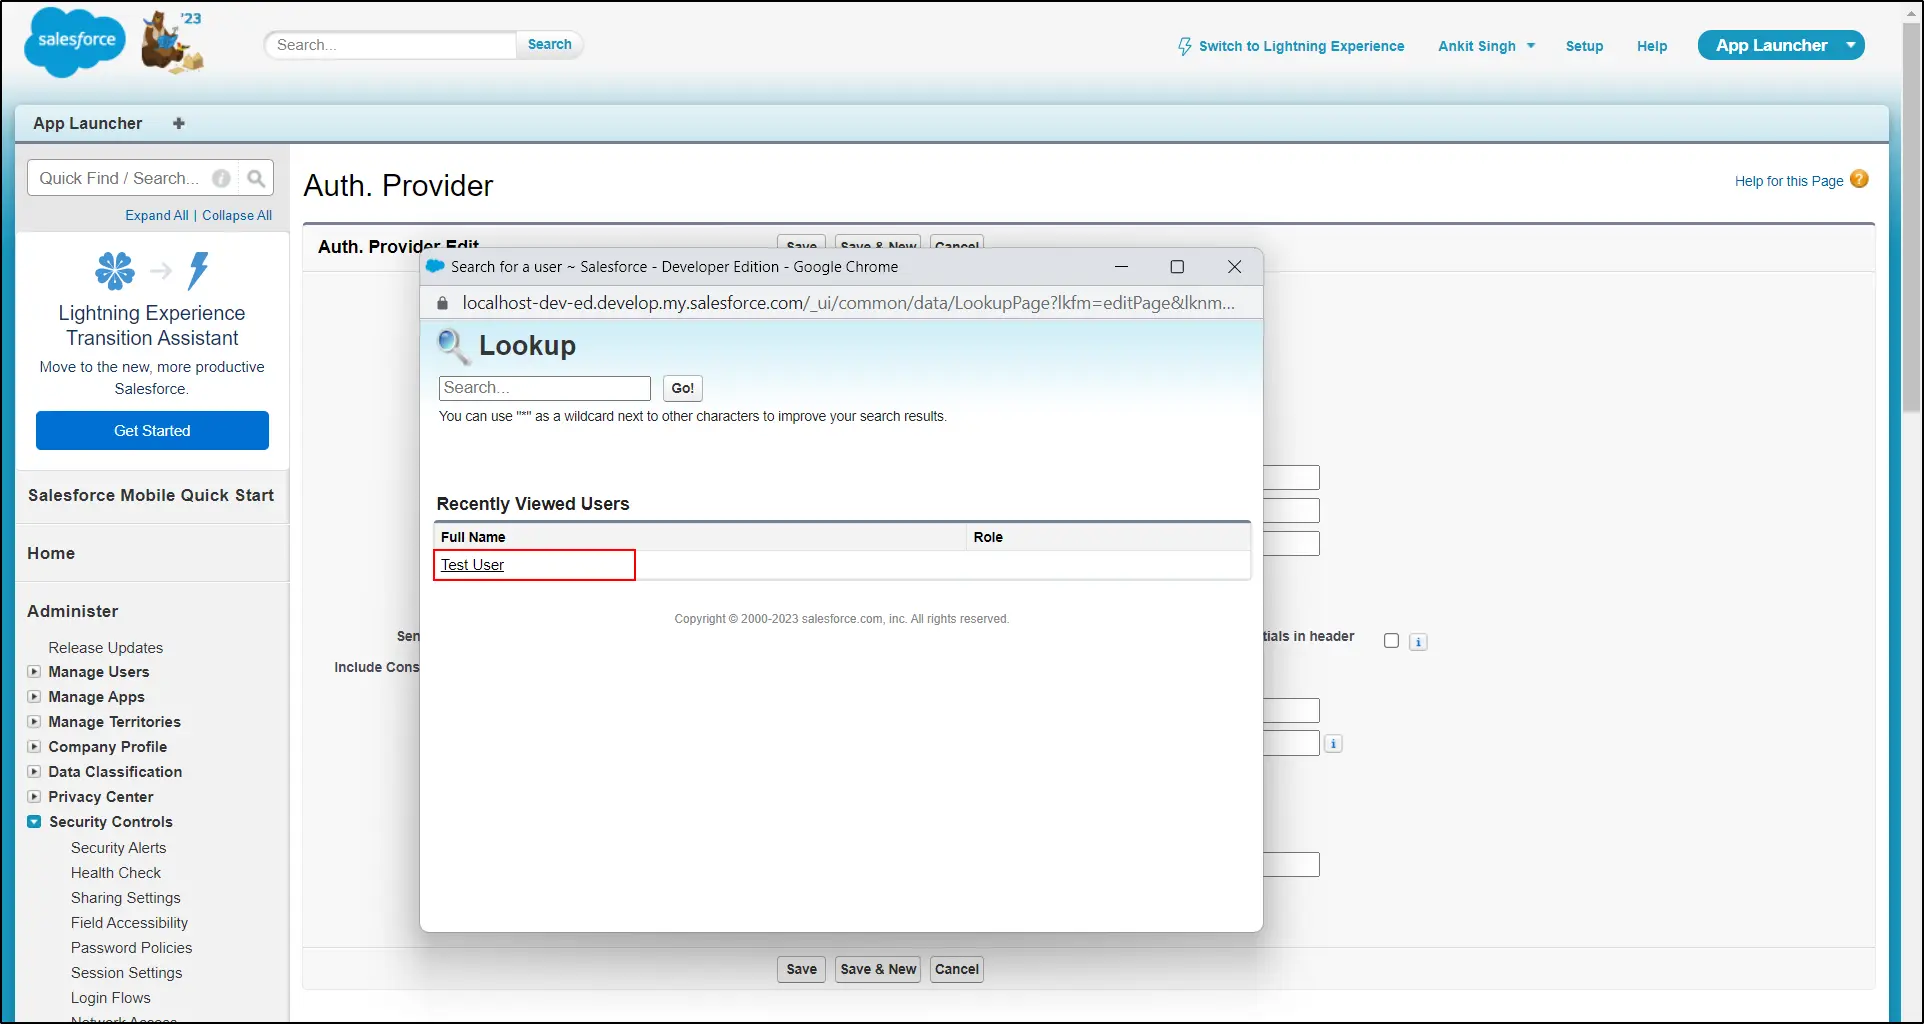  Integrating Salesforce with Drupal OAuth/OIDC Provider - Select Admin as account